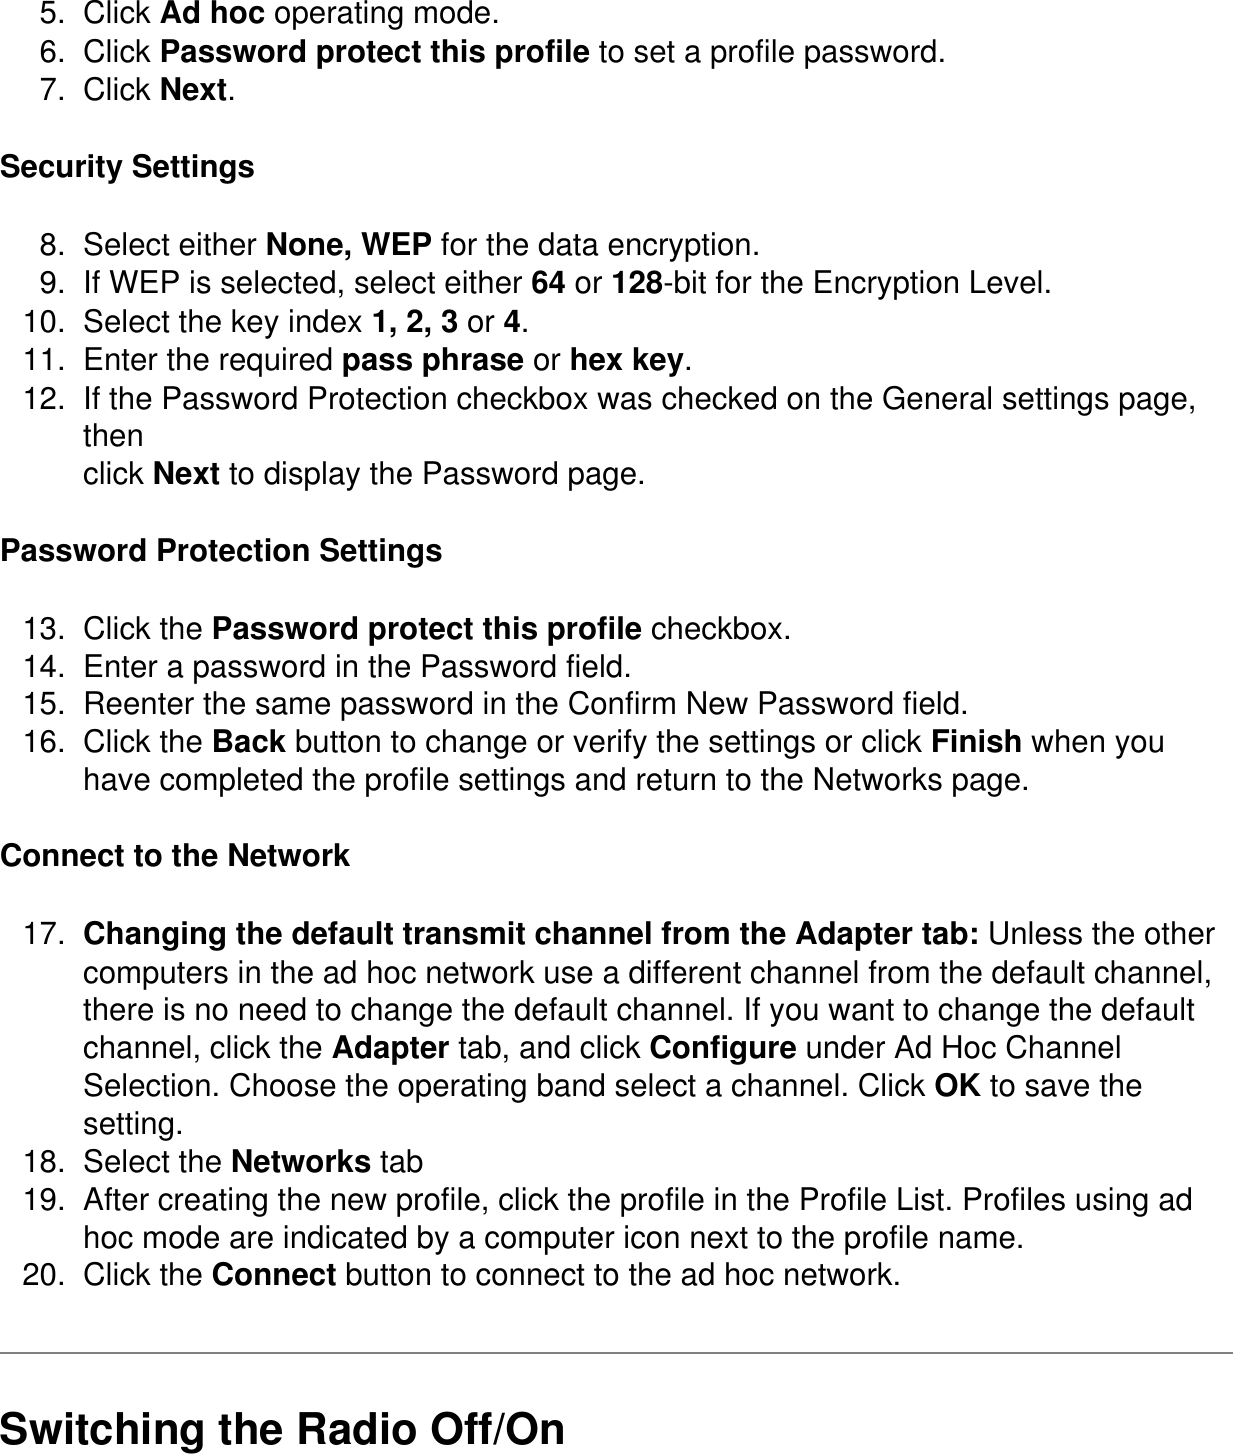 5.  Click Ad hoc operating mode.6.  Click Password protect this profile to set a profile password.7.  Click Next.Security Settings8.  Select either None, WEP for the data encryption.9.  If WEP is selected, select either 64 or 128-bit for the Encryption Level.10.  Select the key index 1, 2, 3 or 4.11.  Enter the required pass phrase or hex key.12.  If the Password Protection checkbox was checked on the General settings page, thenclick Next to display the Password page.Password Protection Settings13.  Click the Password protect this profile checkbox.14.  Enter a password in the Password field.15.  Reenter the same password in the Confirm New Password field.16.  Click the Back button to change or verify the settings or click Finish when you have completed the profile settings and return to the Networks page.Connect to the Network17.  Changing the default transmit channel from the Adapter tab: Unless the other computers in the ad hoc network use a different channel from the default channel, there is no need to change the default channel. If you want to change the default channel, click the Adapter tab, and click Configure under Ad Hoc Channel Selection. Choose the operating band select a channel. Click OK to save the setting.18.  Select the Networks tab19.  After creating the new profile, click the profile in the Profile List. Profiles using ad hoc mode are indicated by a computer icon next to the profile name.20.  Click the Connect button to connect to the ad hoc network.Switching the Radio Off/On